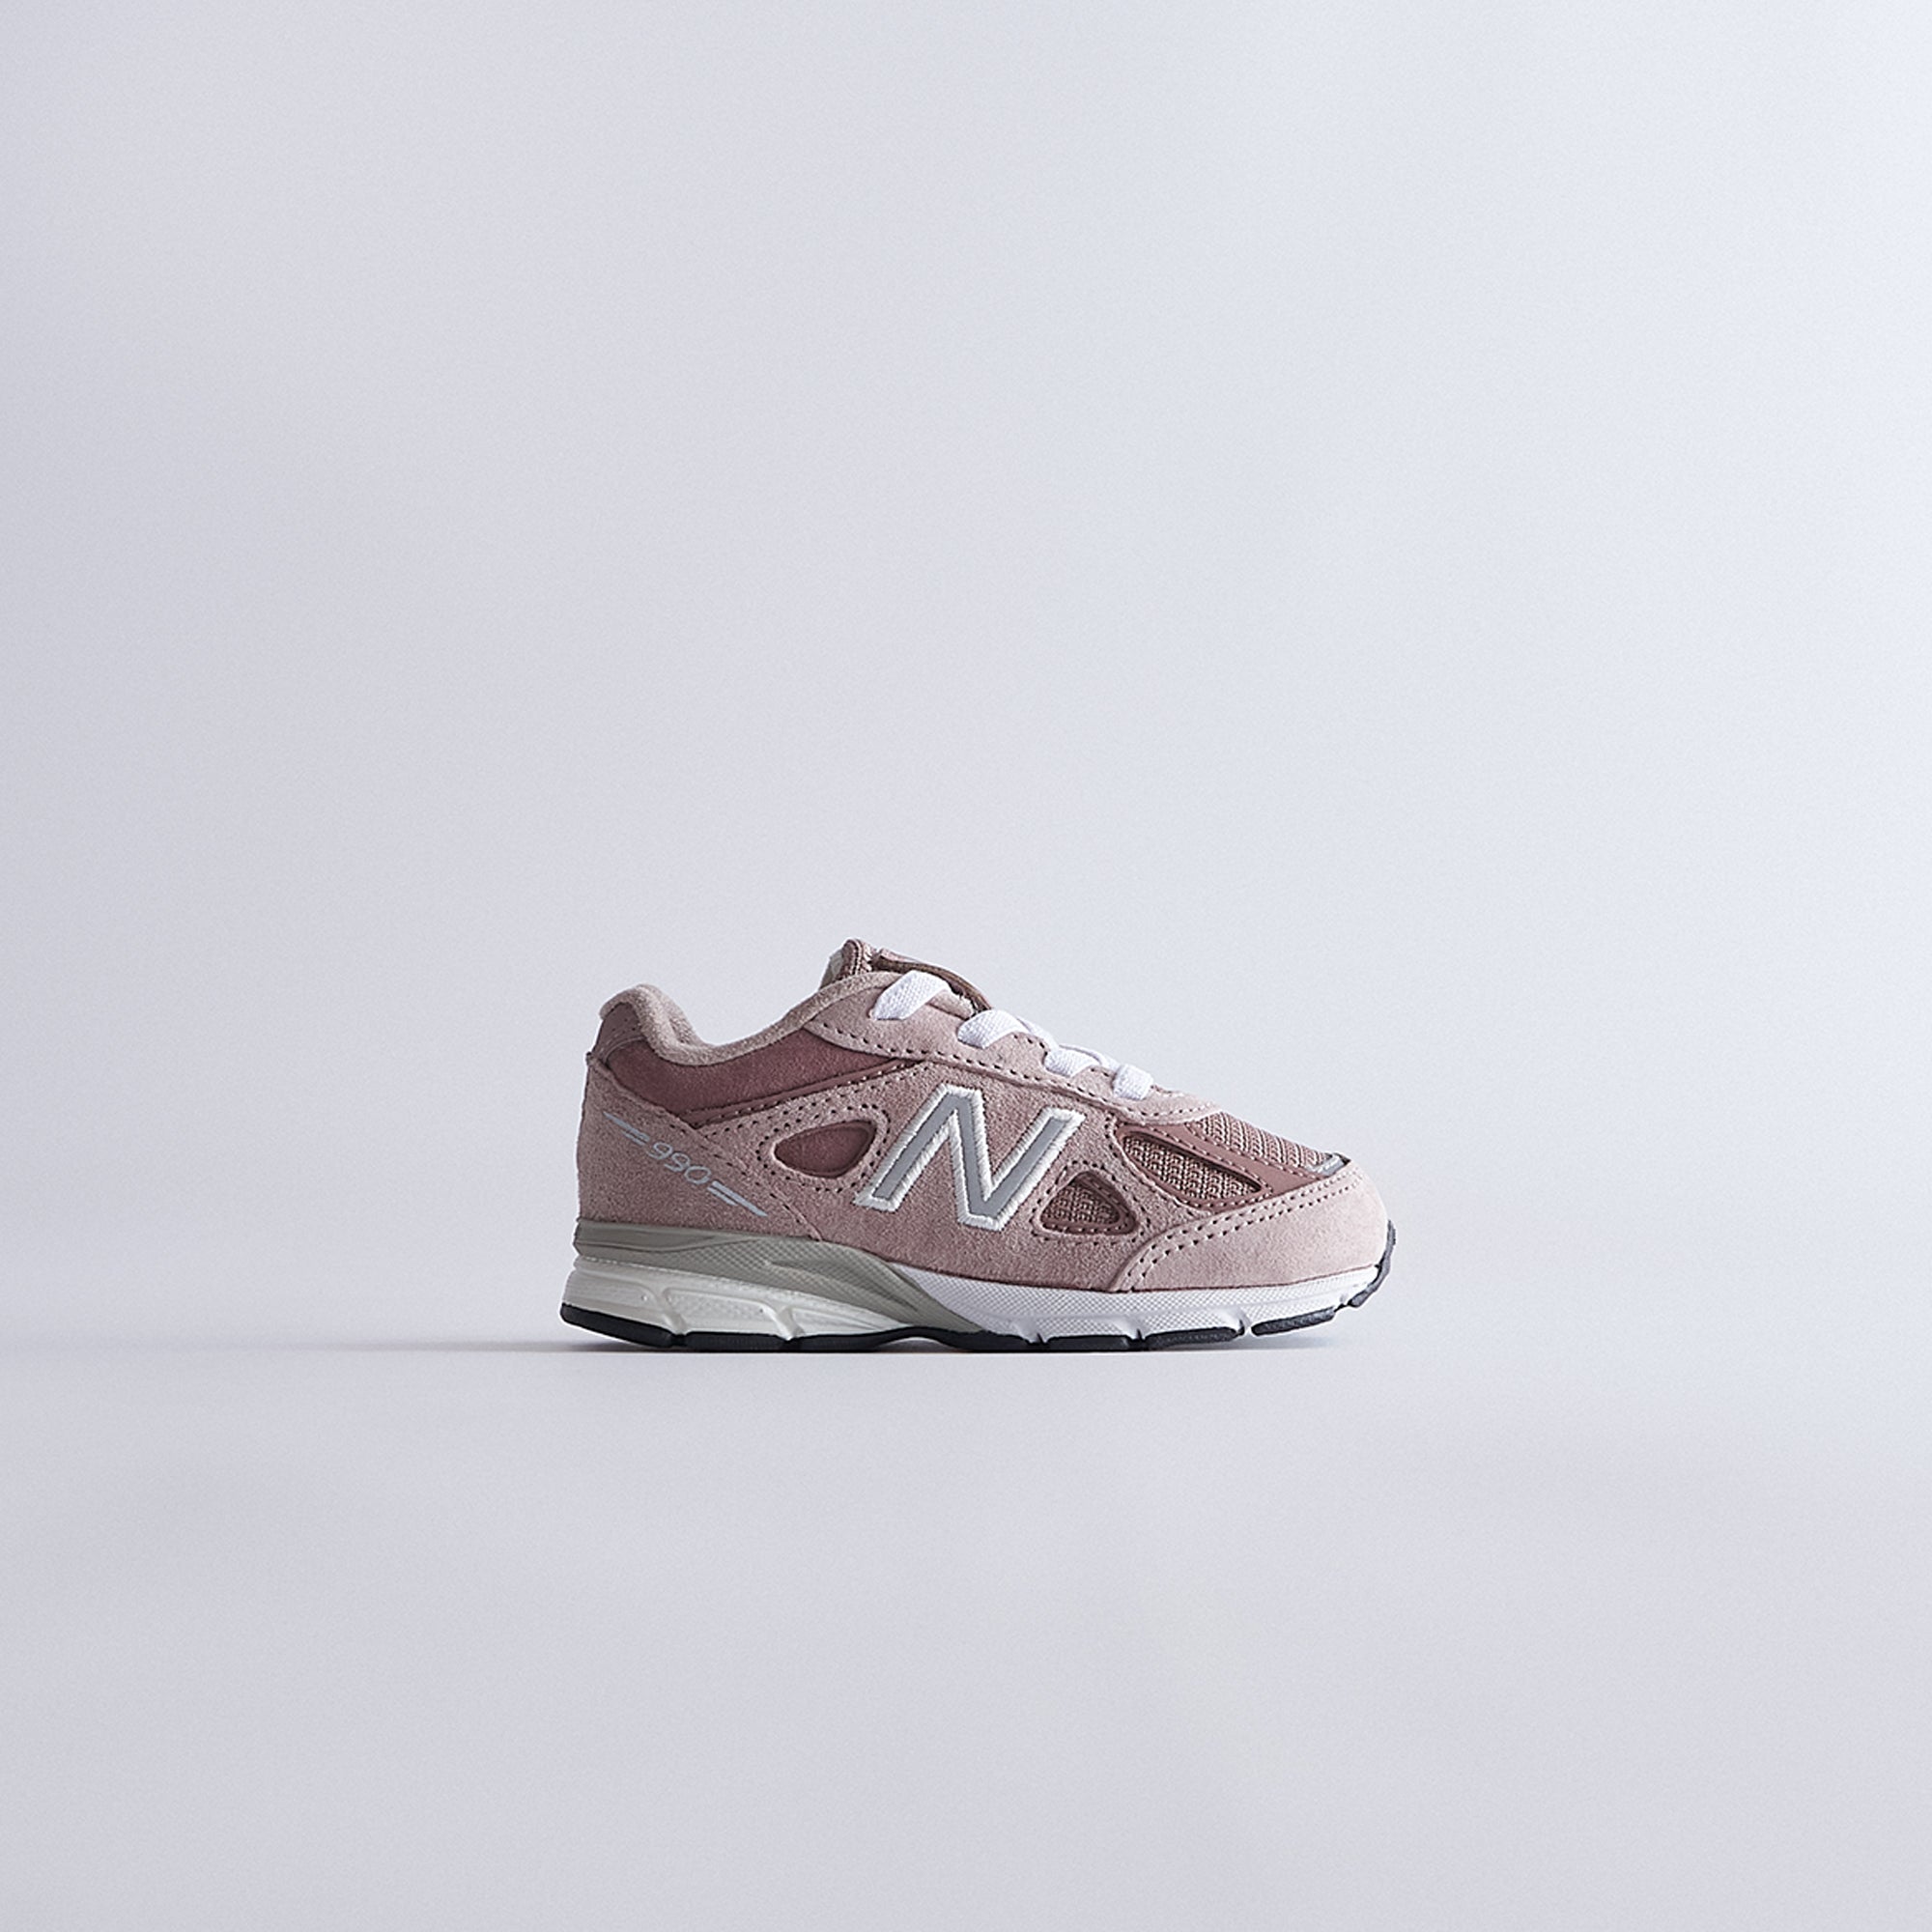 Ronnie Fieg for New Balance 990v4 Toddler - Dusty Rose – Kith